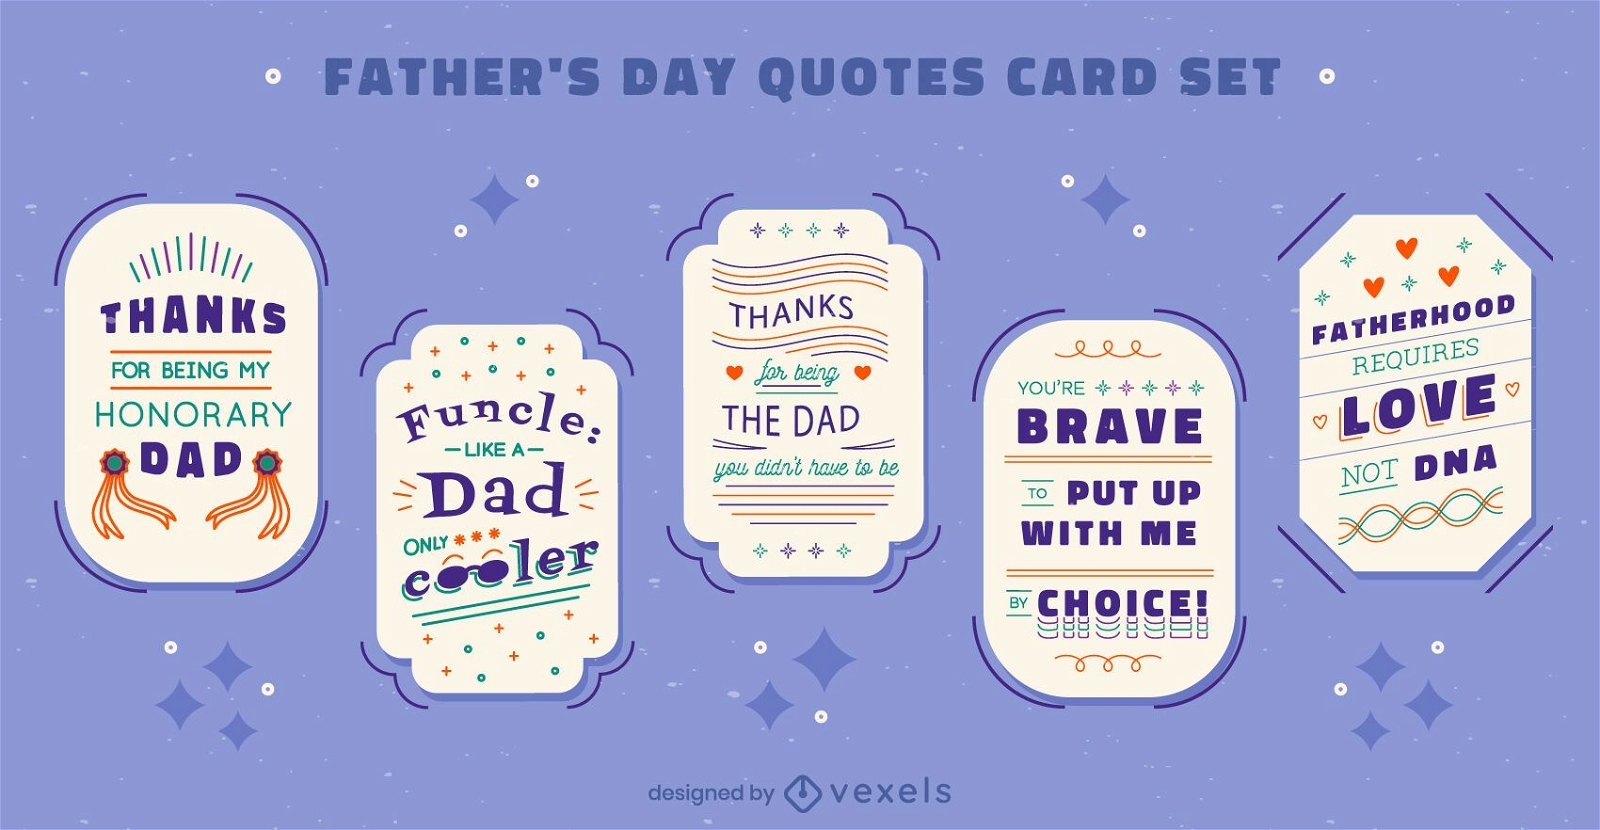 Father's day holiday quotes card set